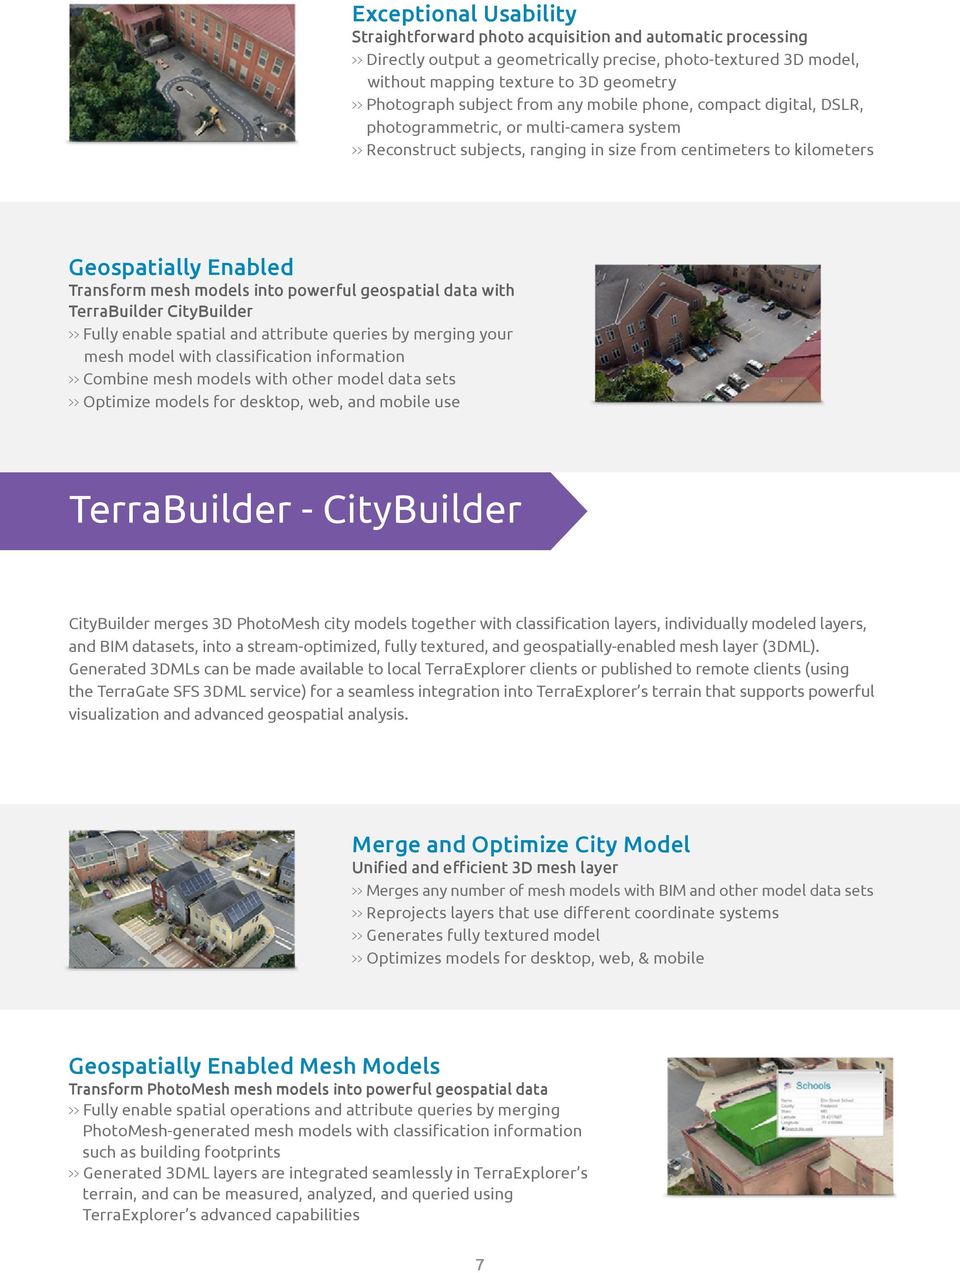 Transform mesh models into powerful geospatial data with TerraBuilder CityBuilder >> Fully enable spatial and attribute queries by merging your mesh model with classification information >> Combine